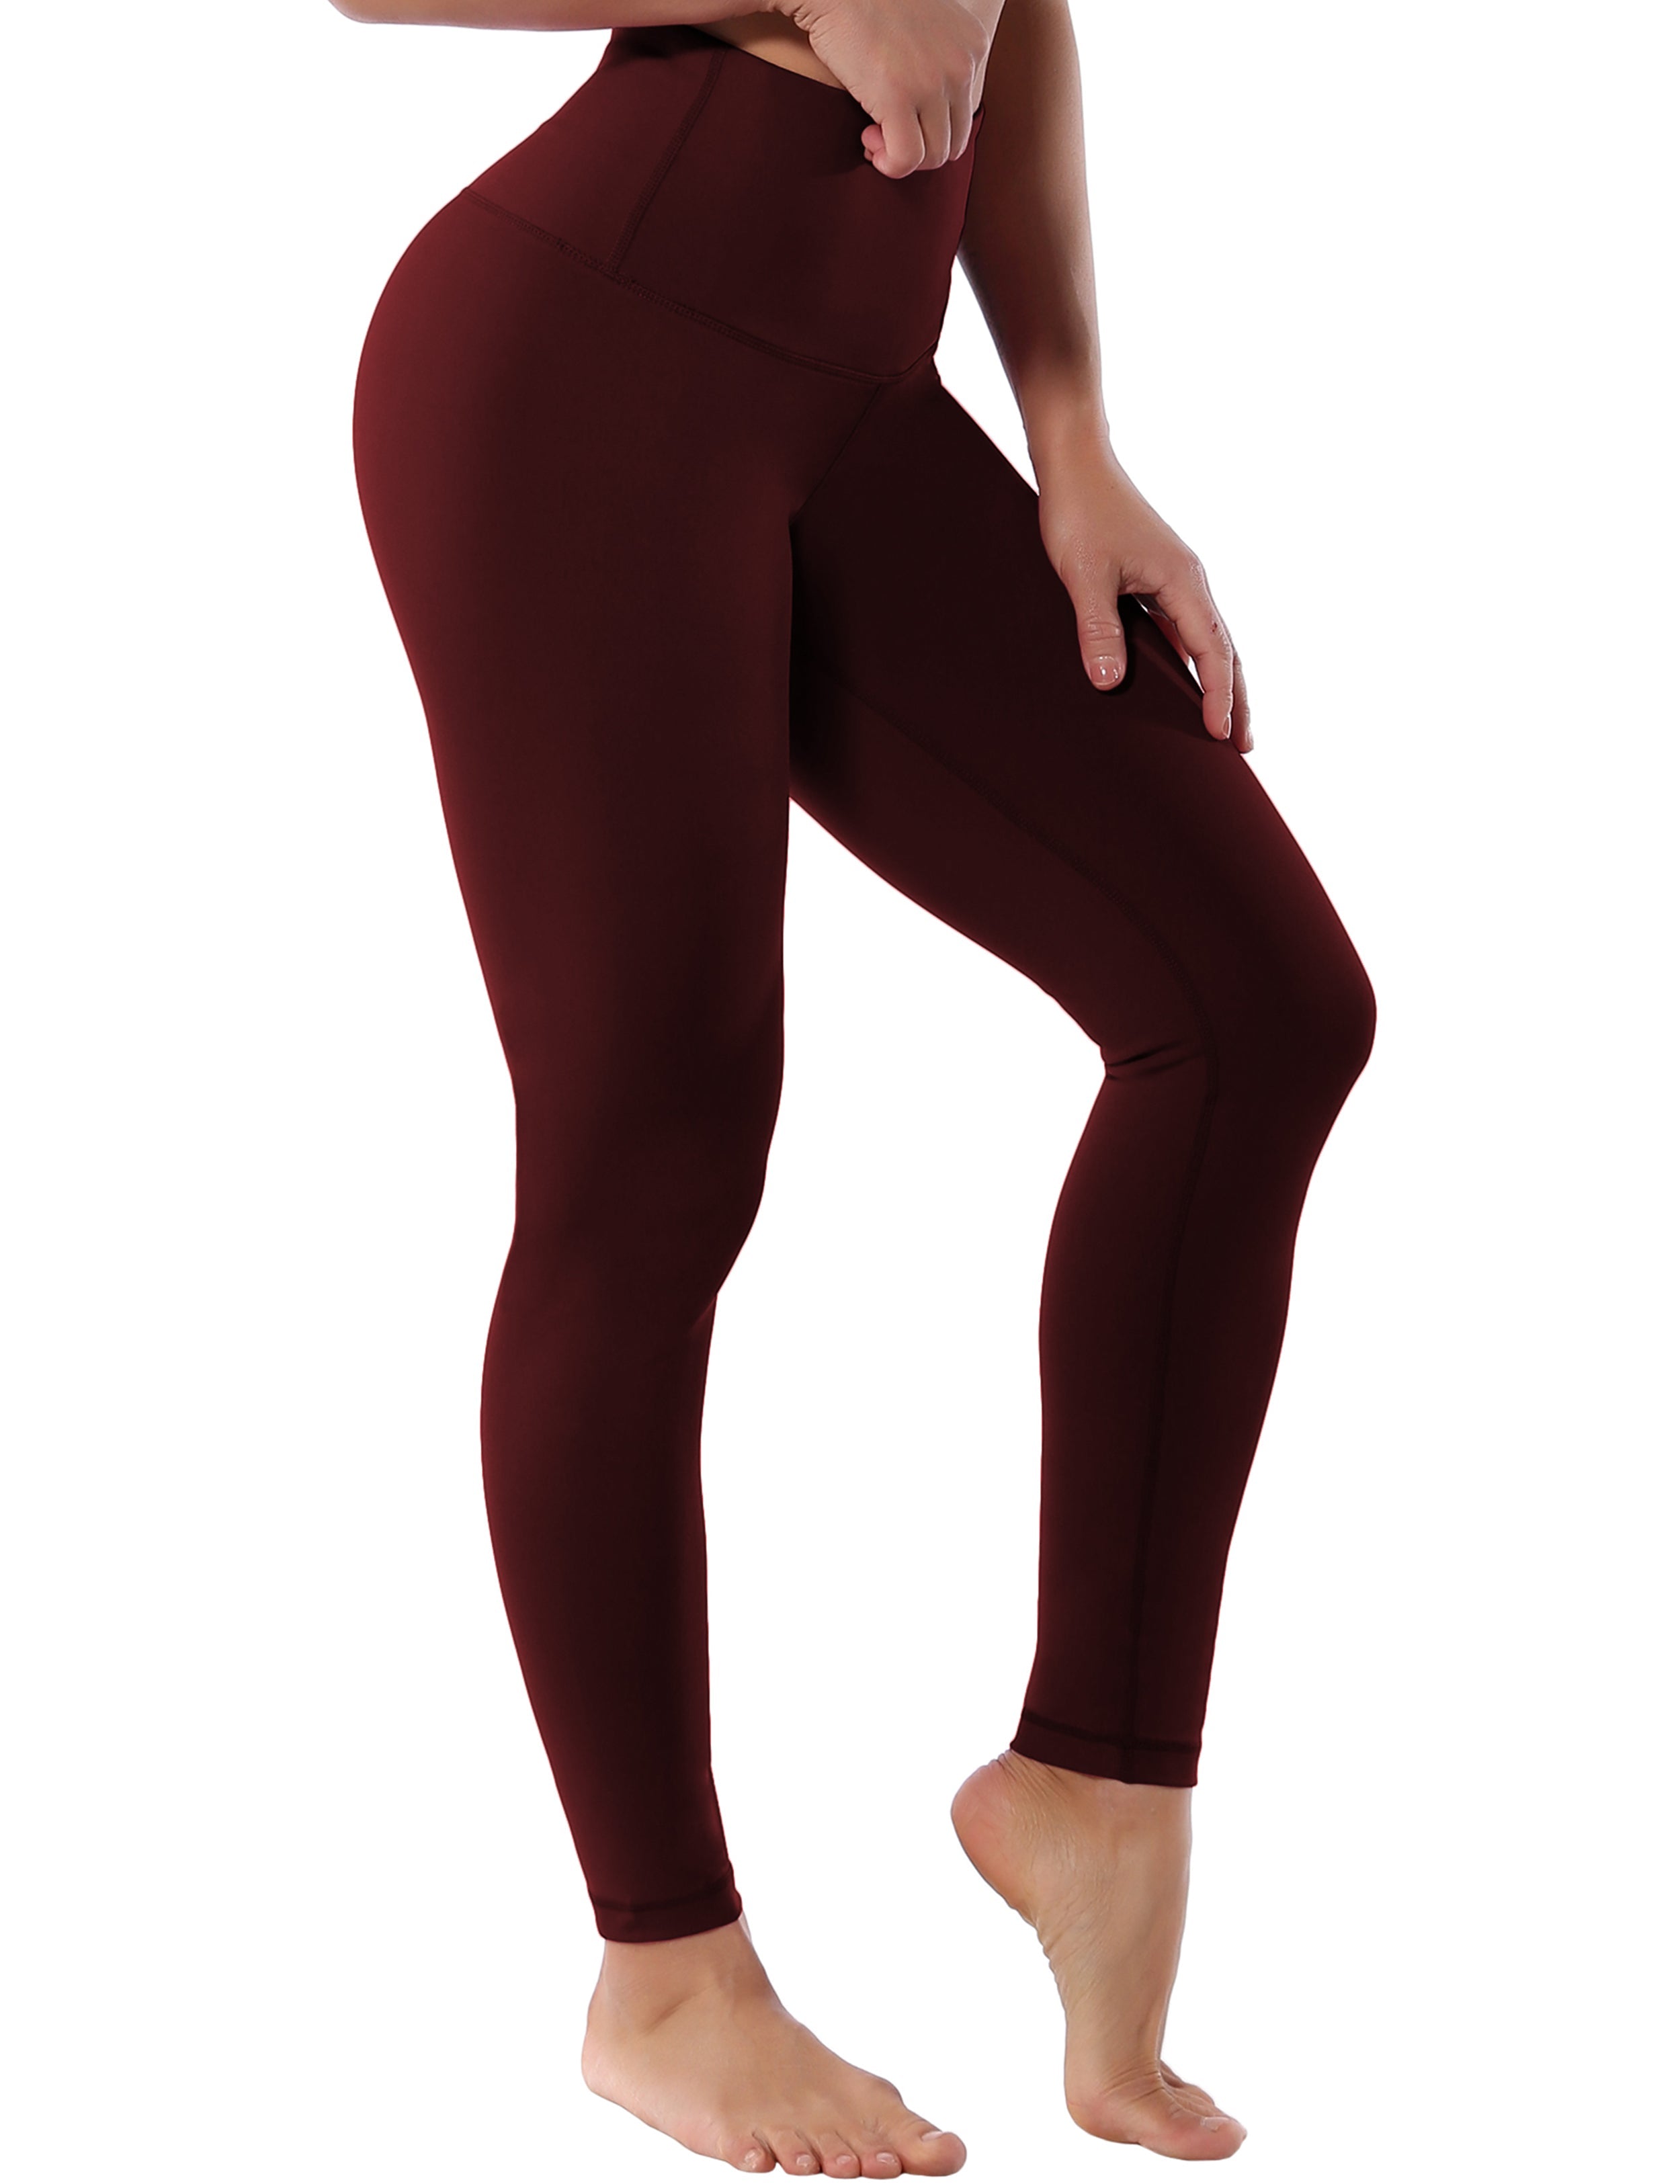 High Waist Gym Pants cherryred 75%Nylon/25%Spandex Fabric doesn't attract lint easily 4-way stretch No see-through Moisture-wicking Tummy control Inner pocket Four lengths